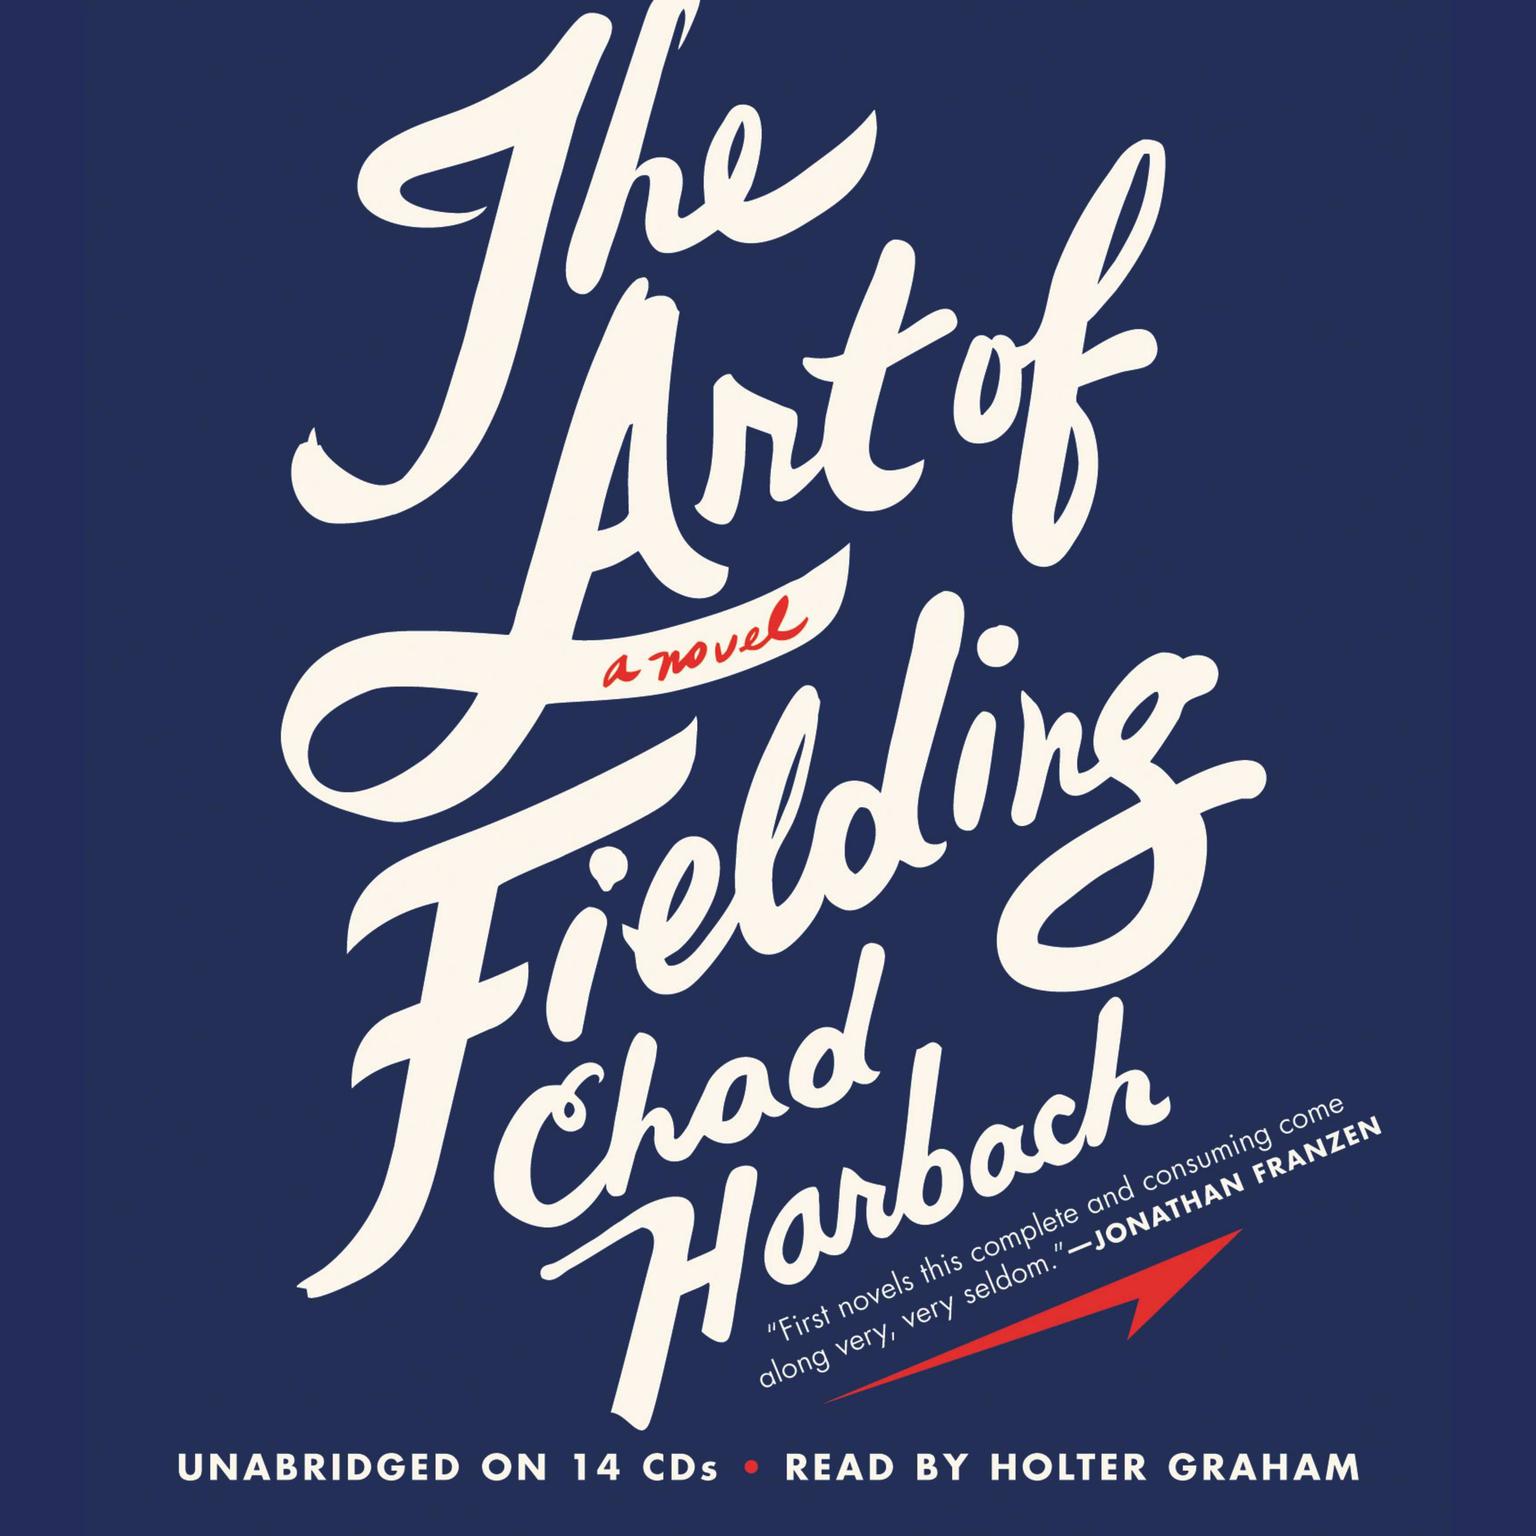 The Art of Fielding: A Novel Audiobook, by Chad Harbach